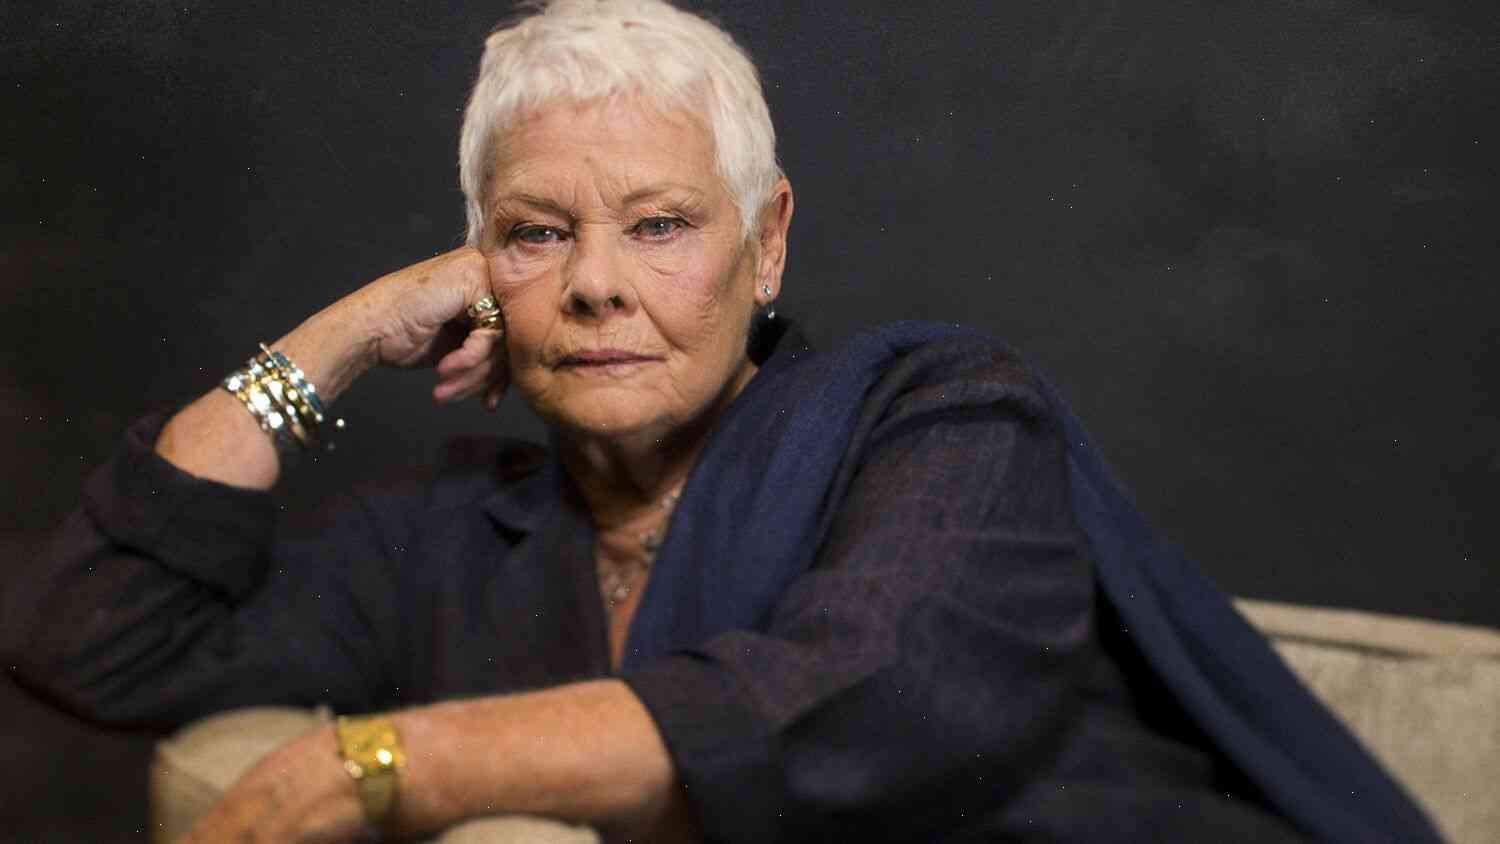 Judi Dench says she didn't deserve to win because she was a "spoilt princess"